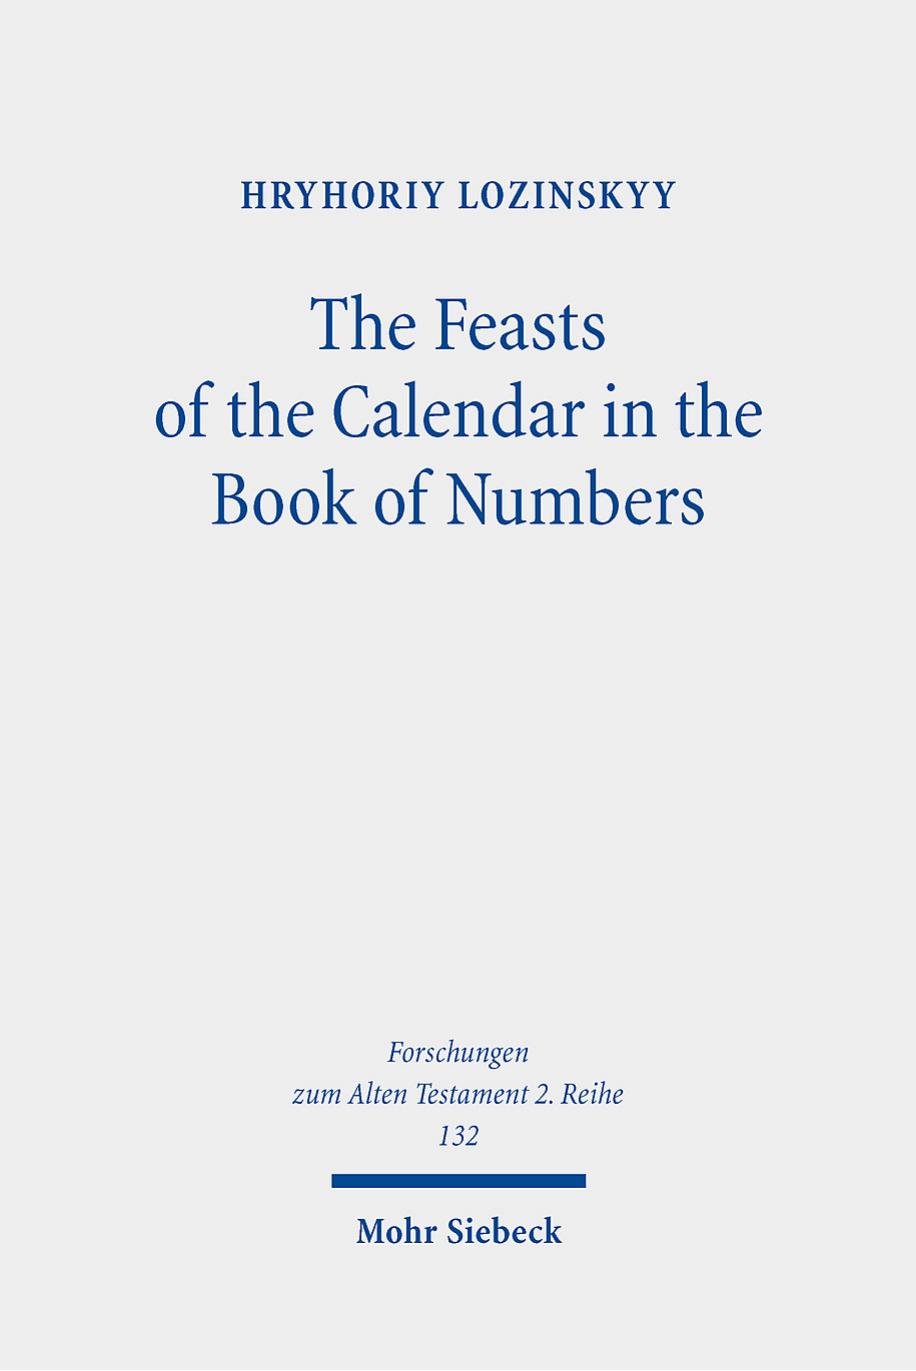 The Feasts of the Calendar in the Book of Numbers: Num 28:16-30:1 in the Light of Related Biblical Texts and Some Ancient Sources of 200 BCE-100 CE by Hryhoriy Lozinskyy